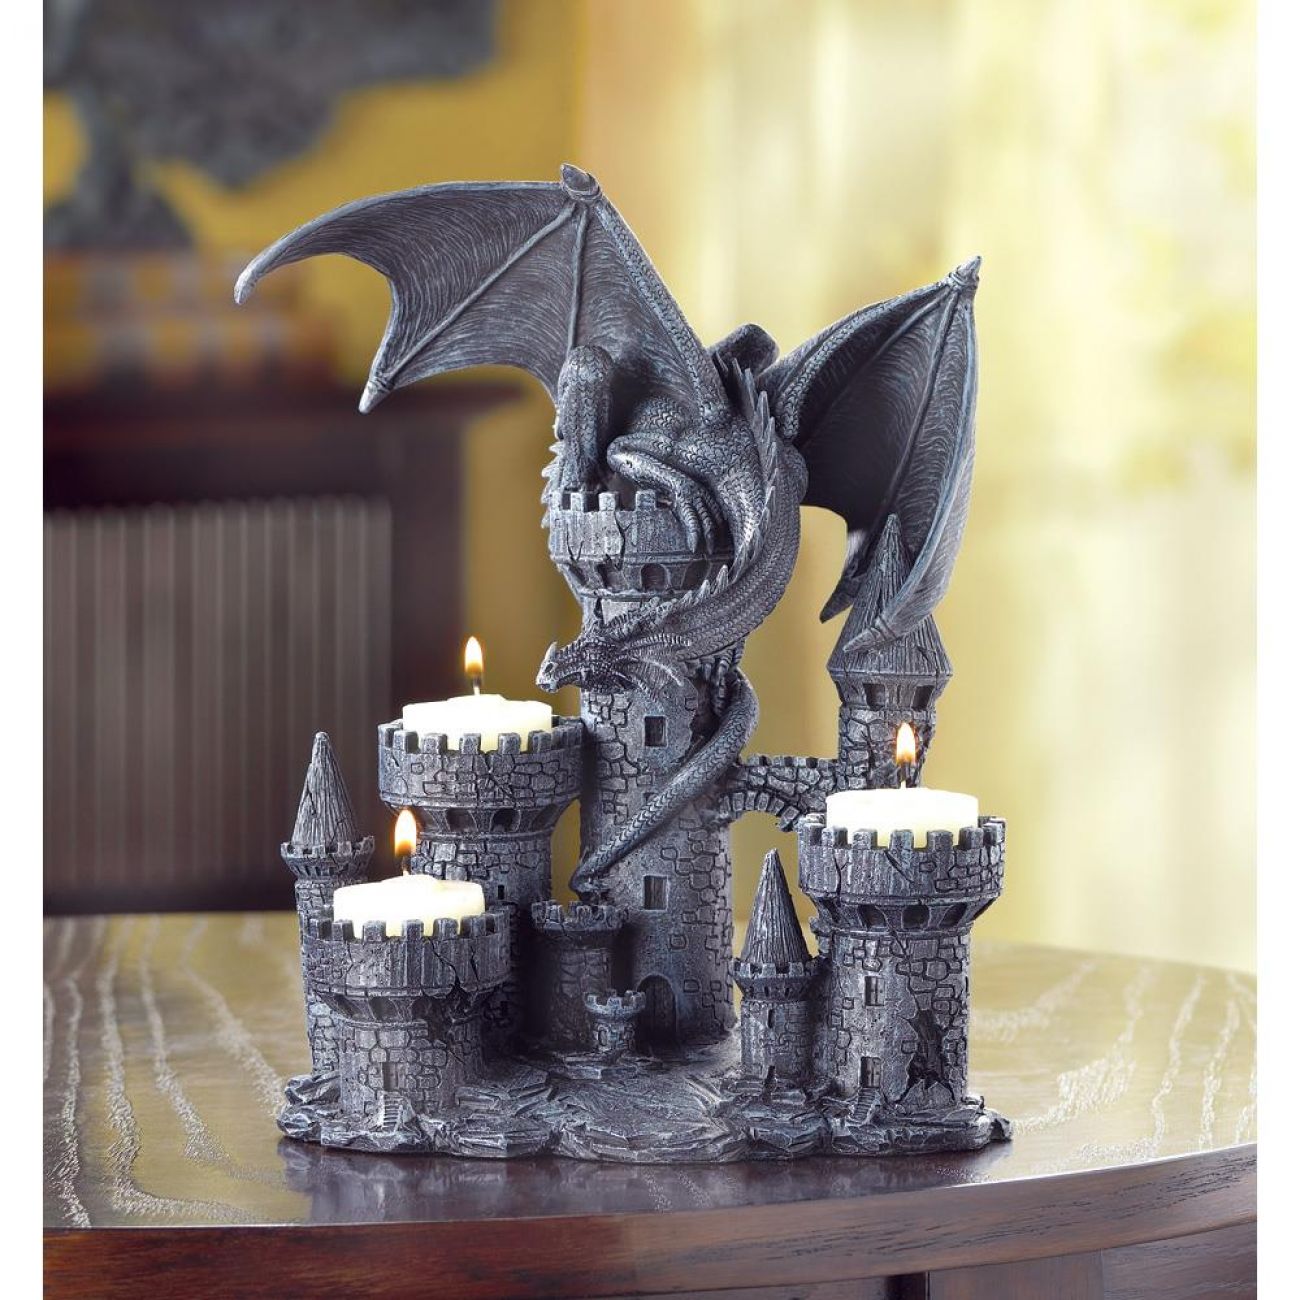 Dragon Candle Holder